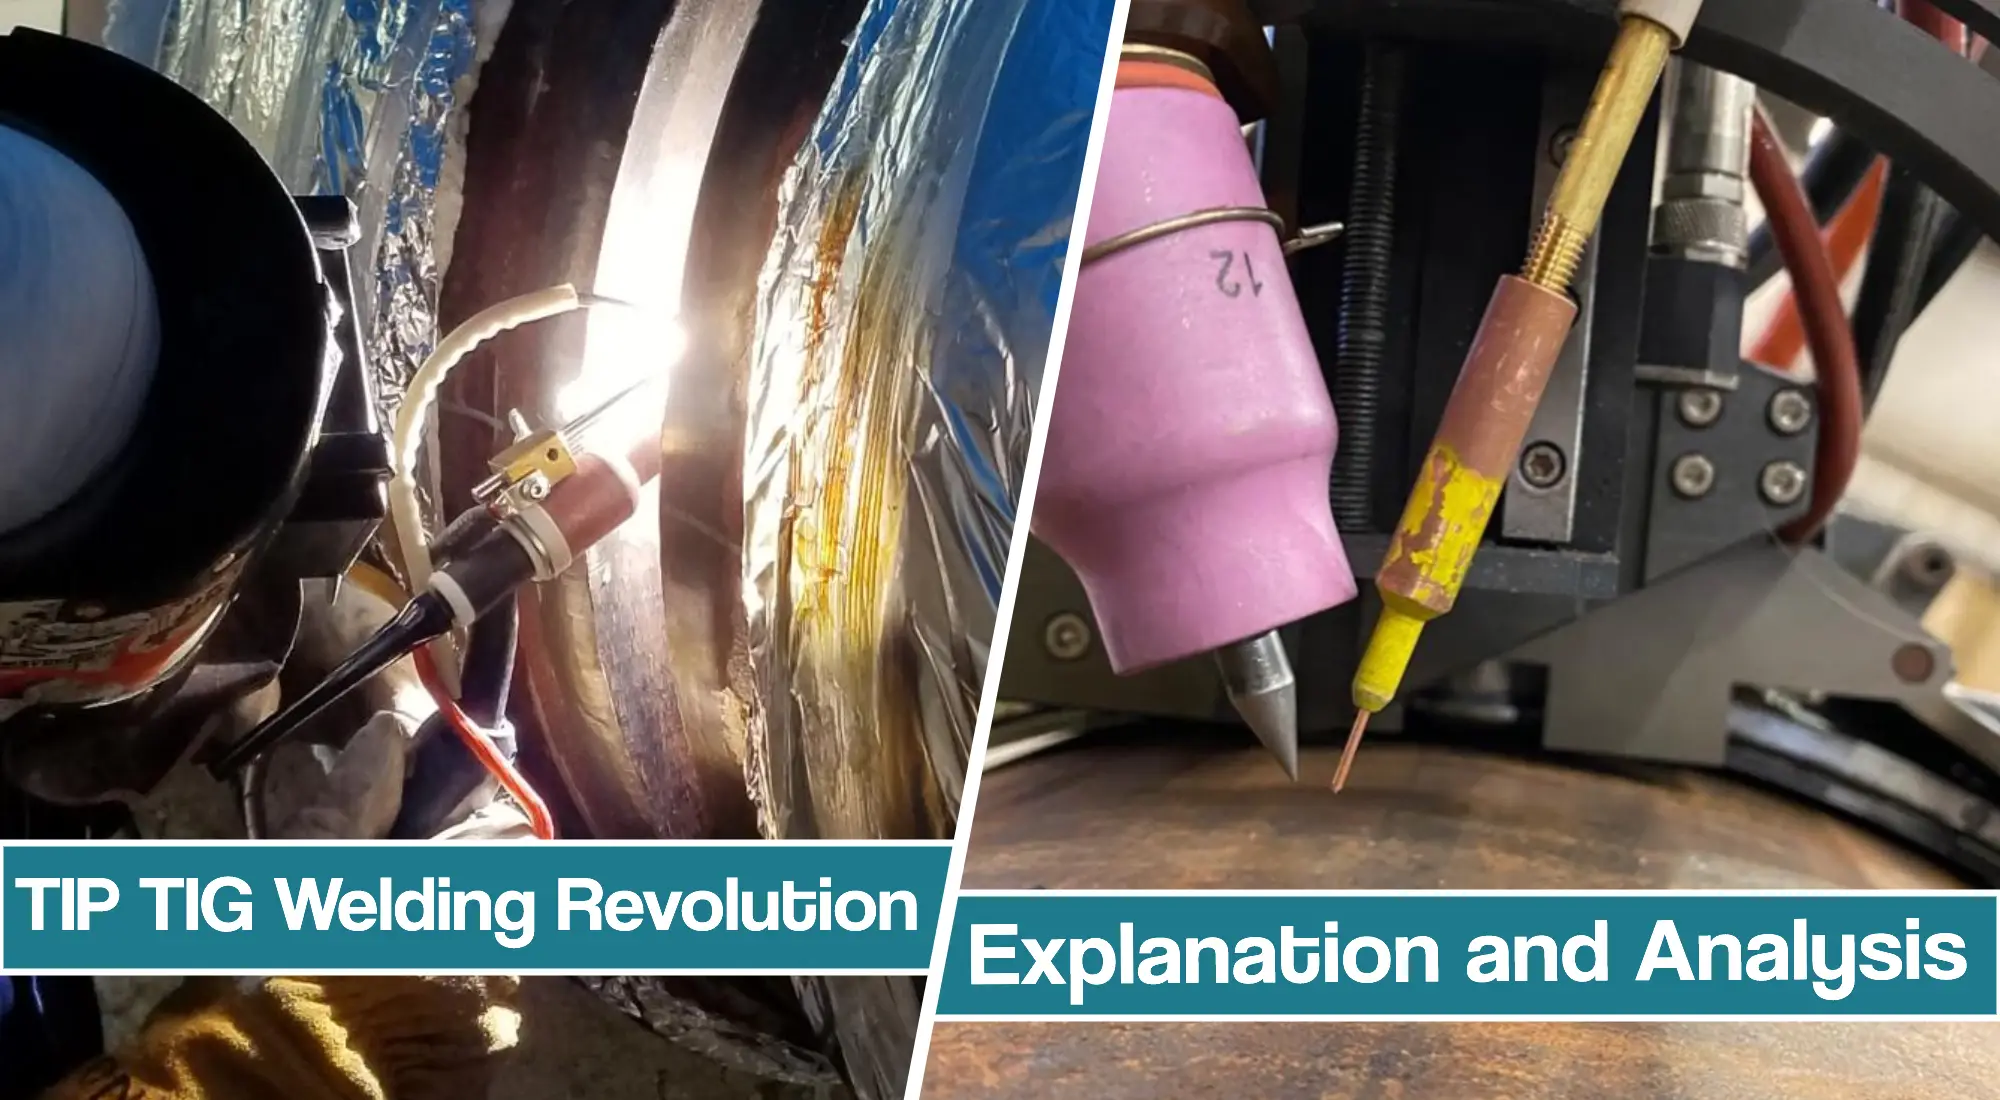 Featured image for the TIP TIG welding article